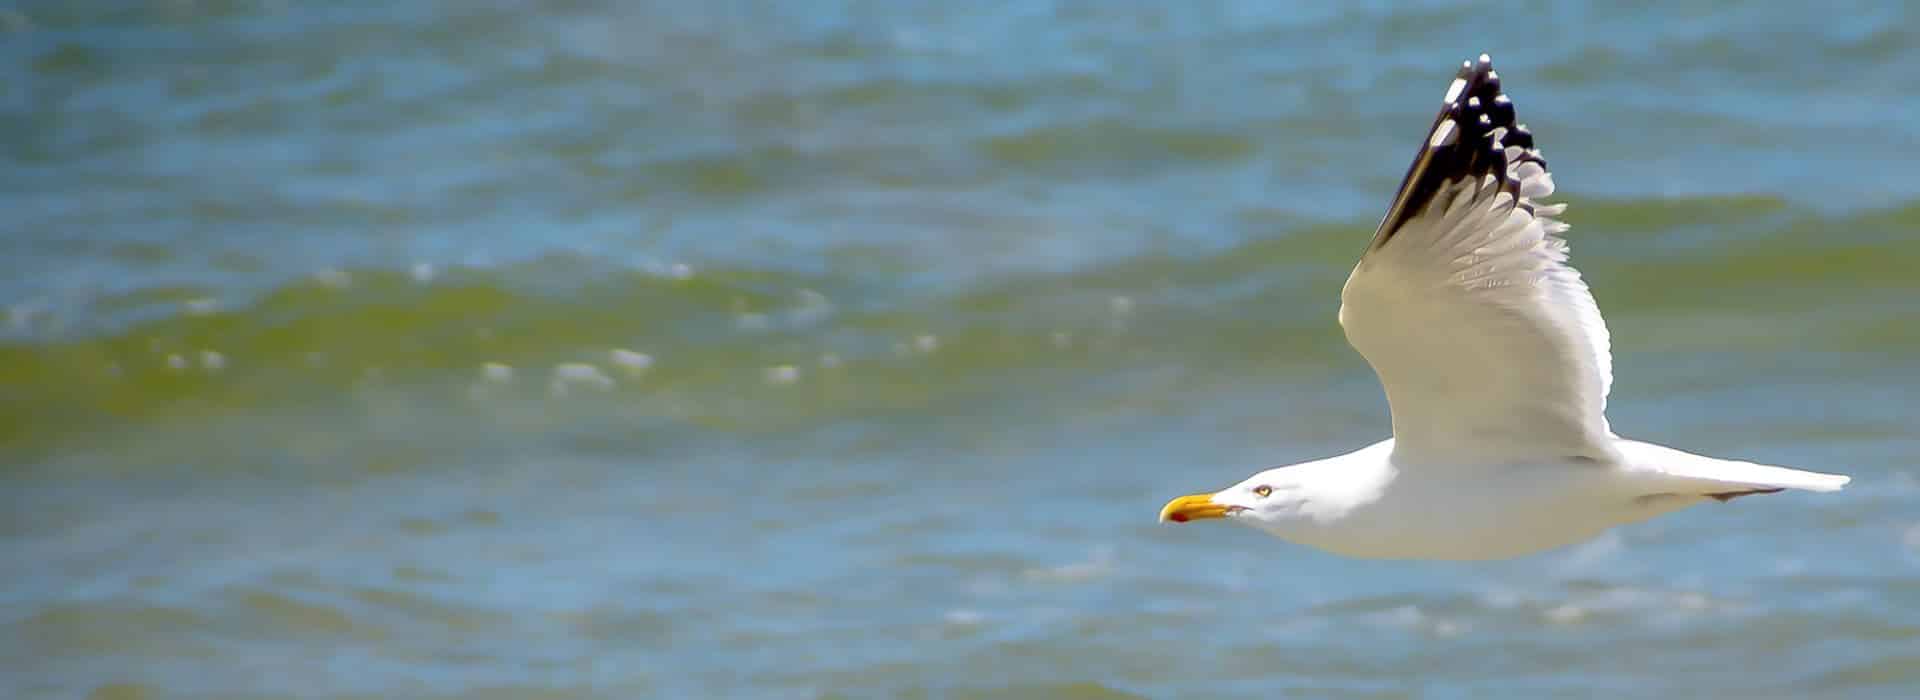 Large white bird with long orange beak and black tipped wings flying over the water